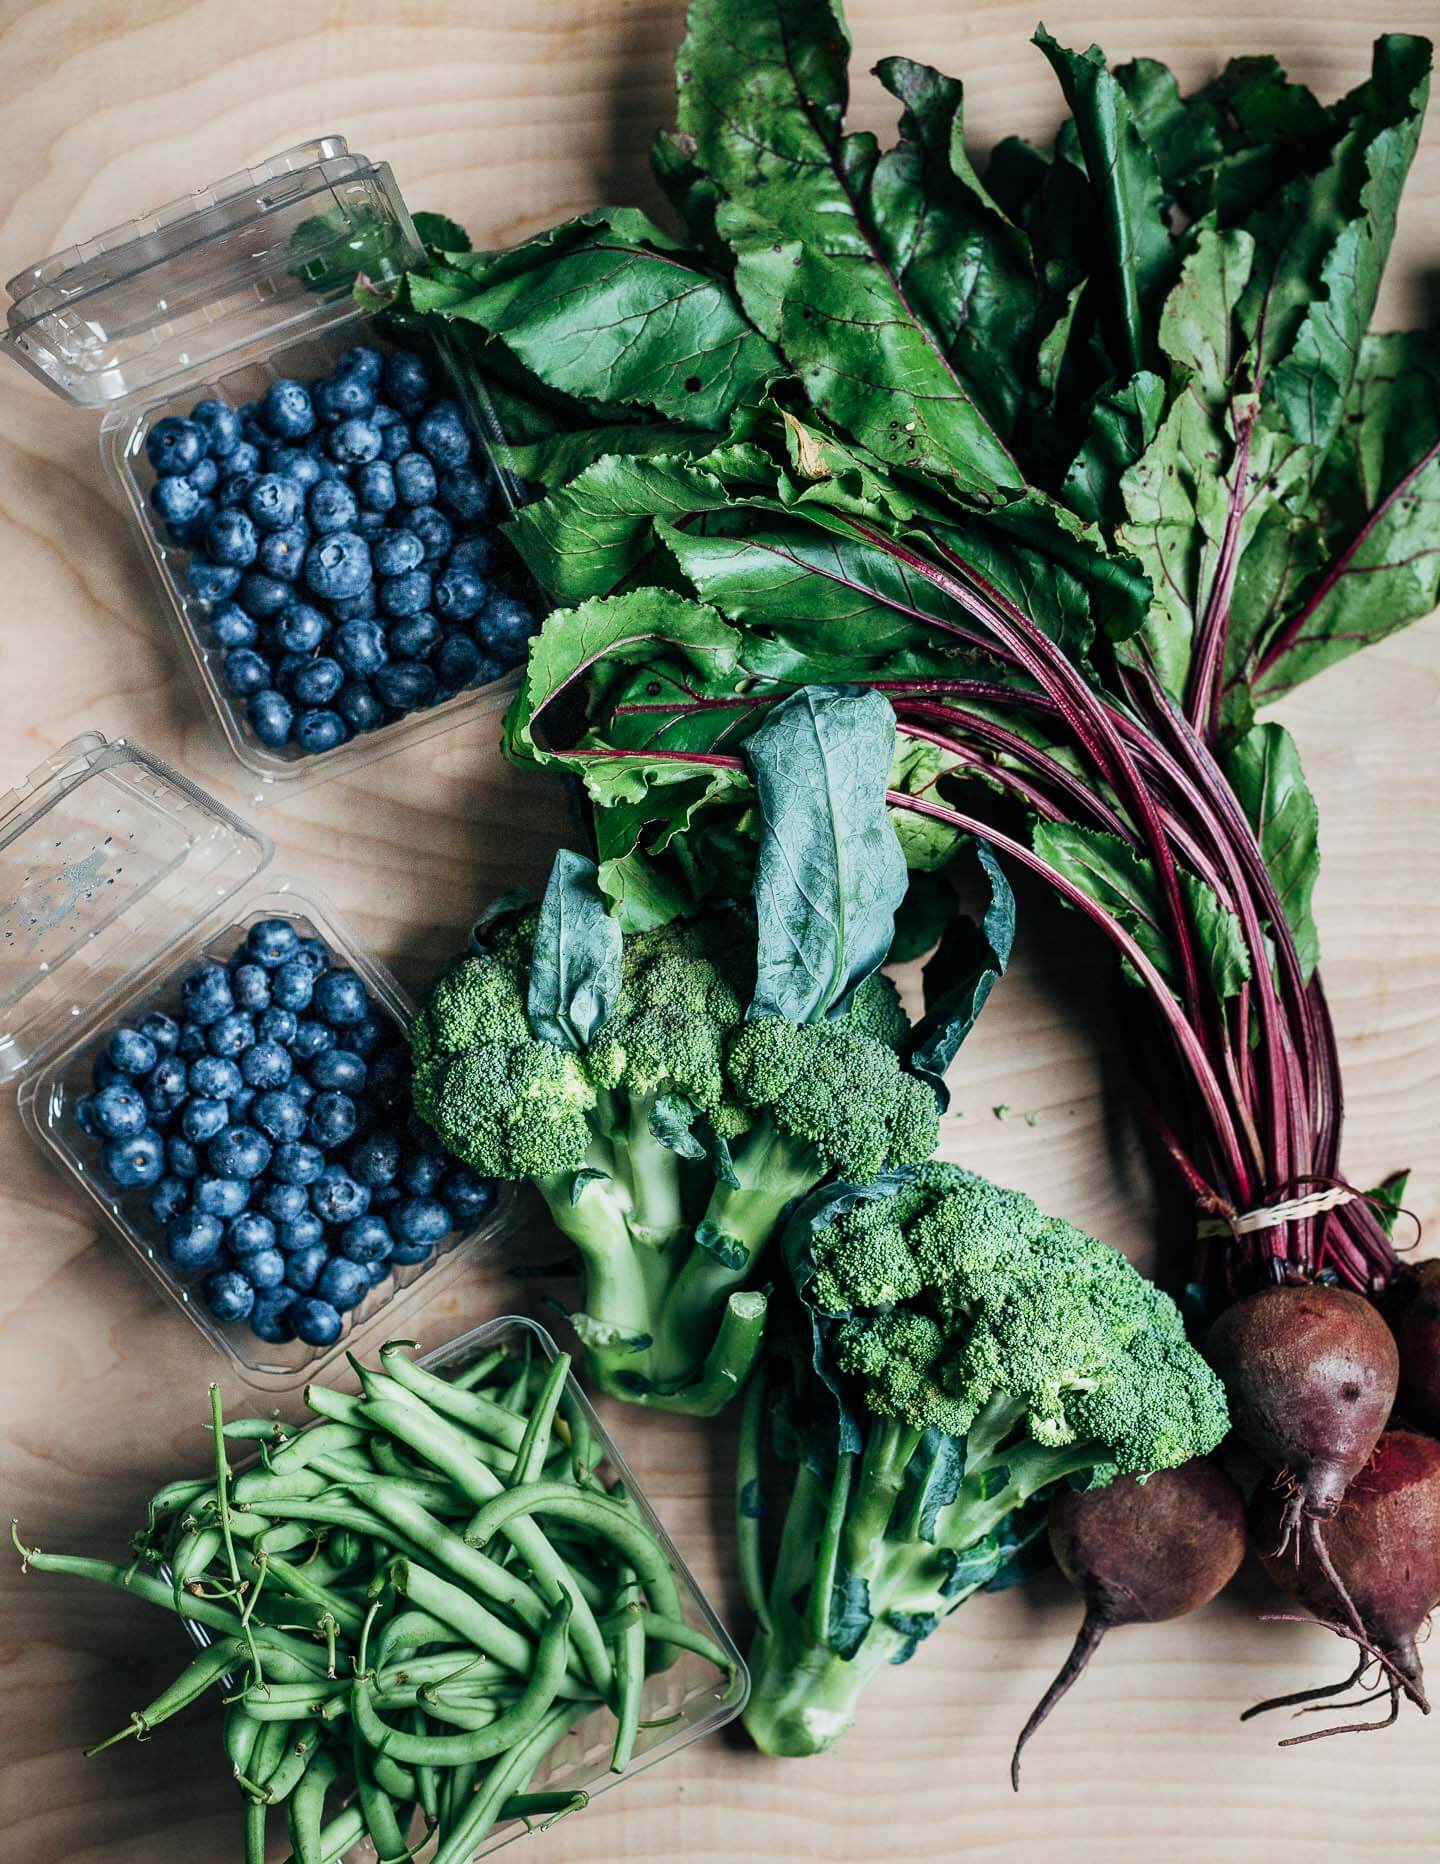 Blueberries, broccoli, beets, and green beans arranged on a table. 